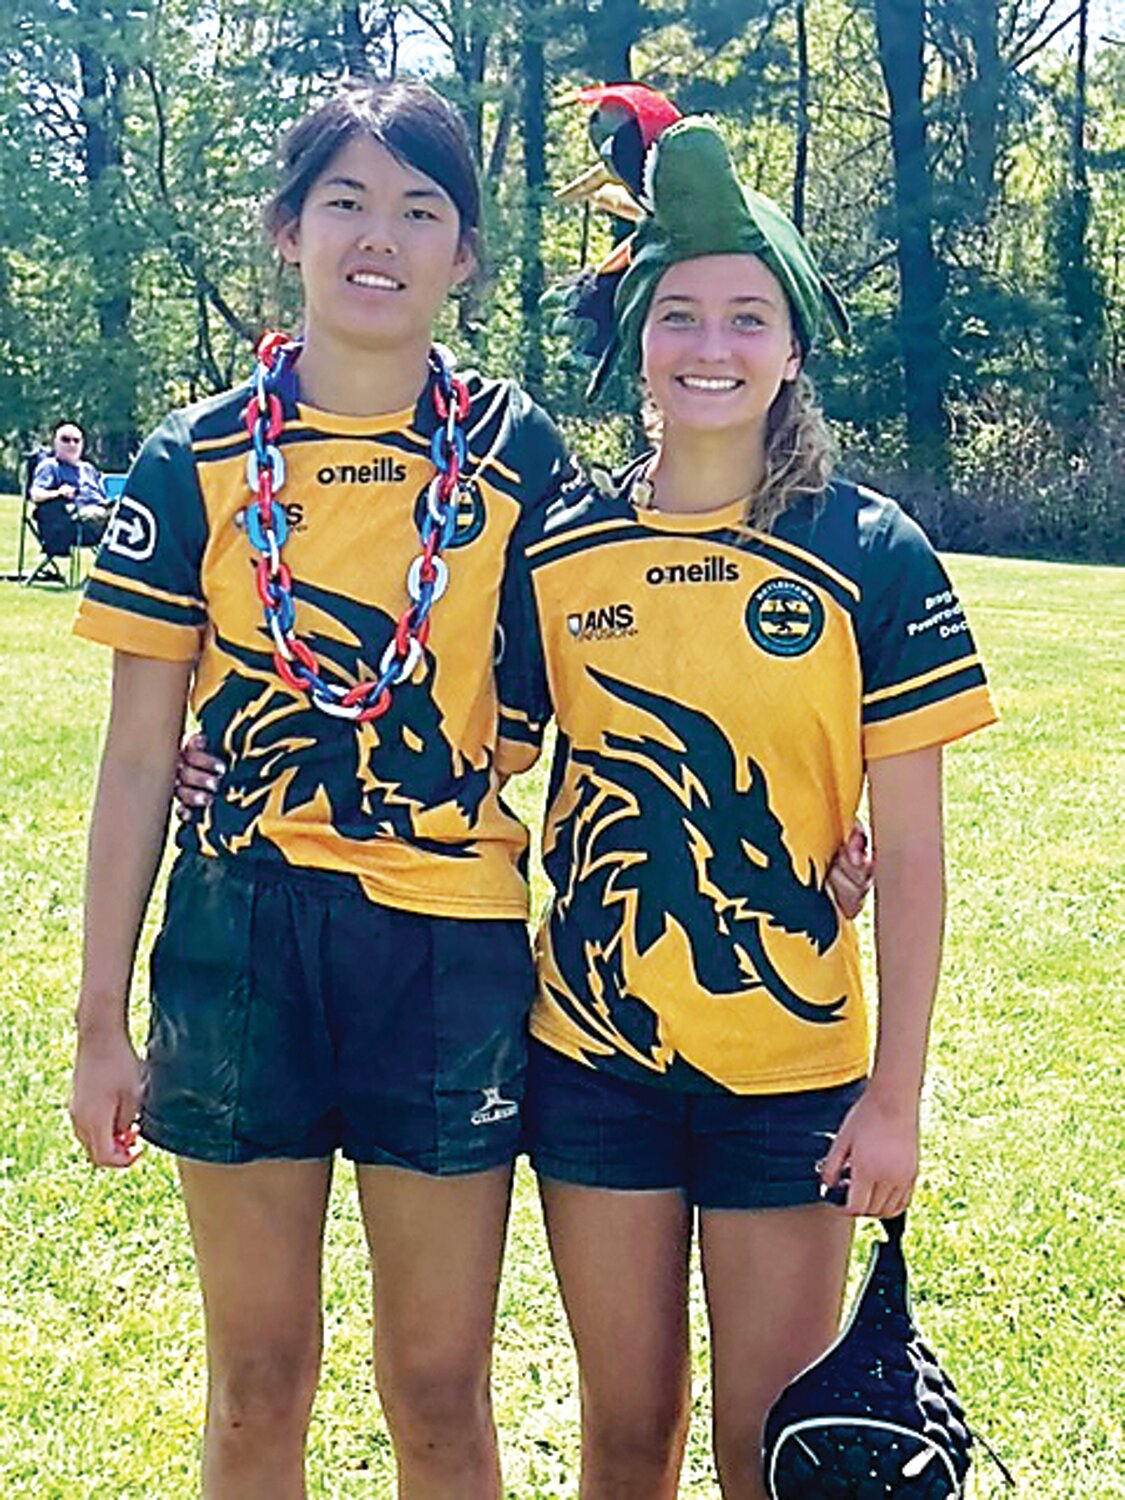 Doylestown Rugby Academy high school girls player Addy LaCarrubba earned the Hit Chain Award and Siena Accardi  was named the Player of the Match following their home game on April 28.